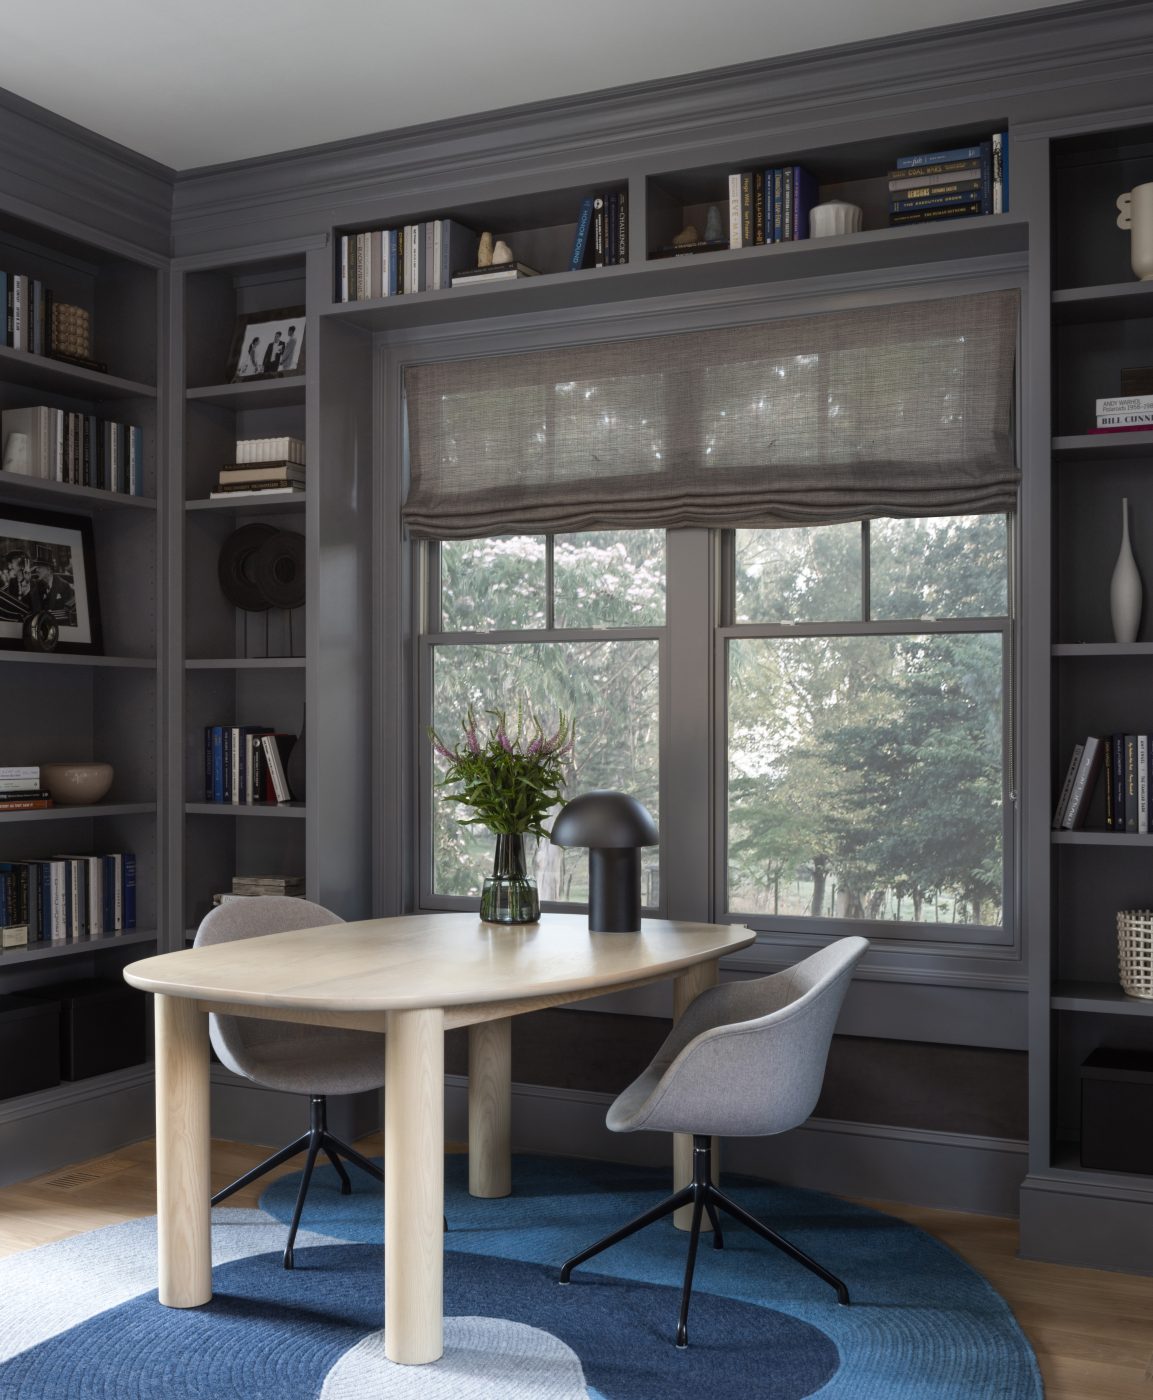 The study of a home designed by AK Studio in Bethesda, Maryland